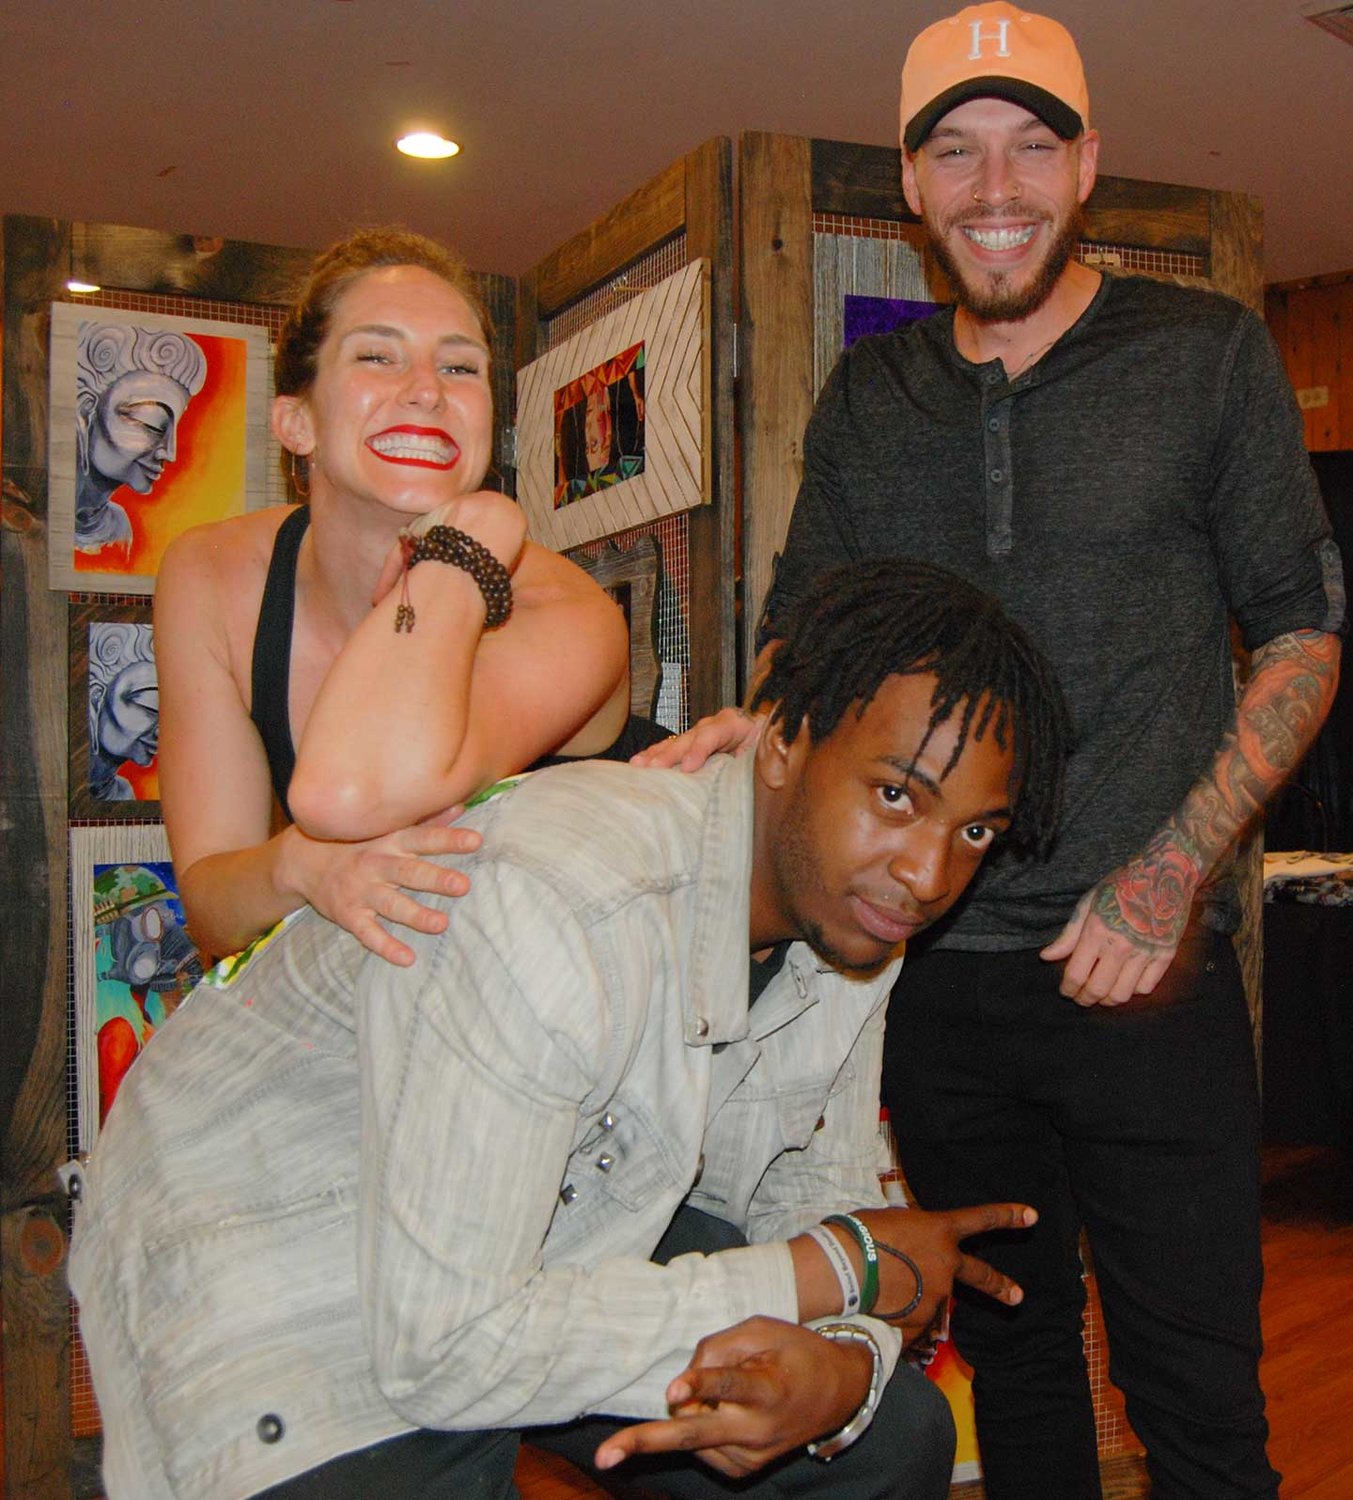 “Young, hip & talented” could have been the title of the pop-up “Creative Art and Design Show” featuring the work of Emily Bishop, Malik Bridges and Josh Deitchman.